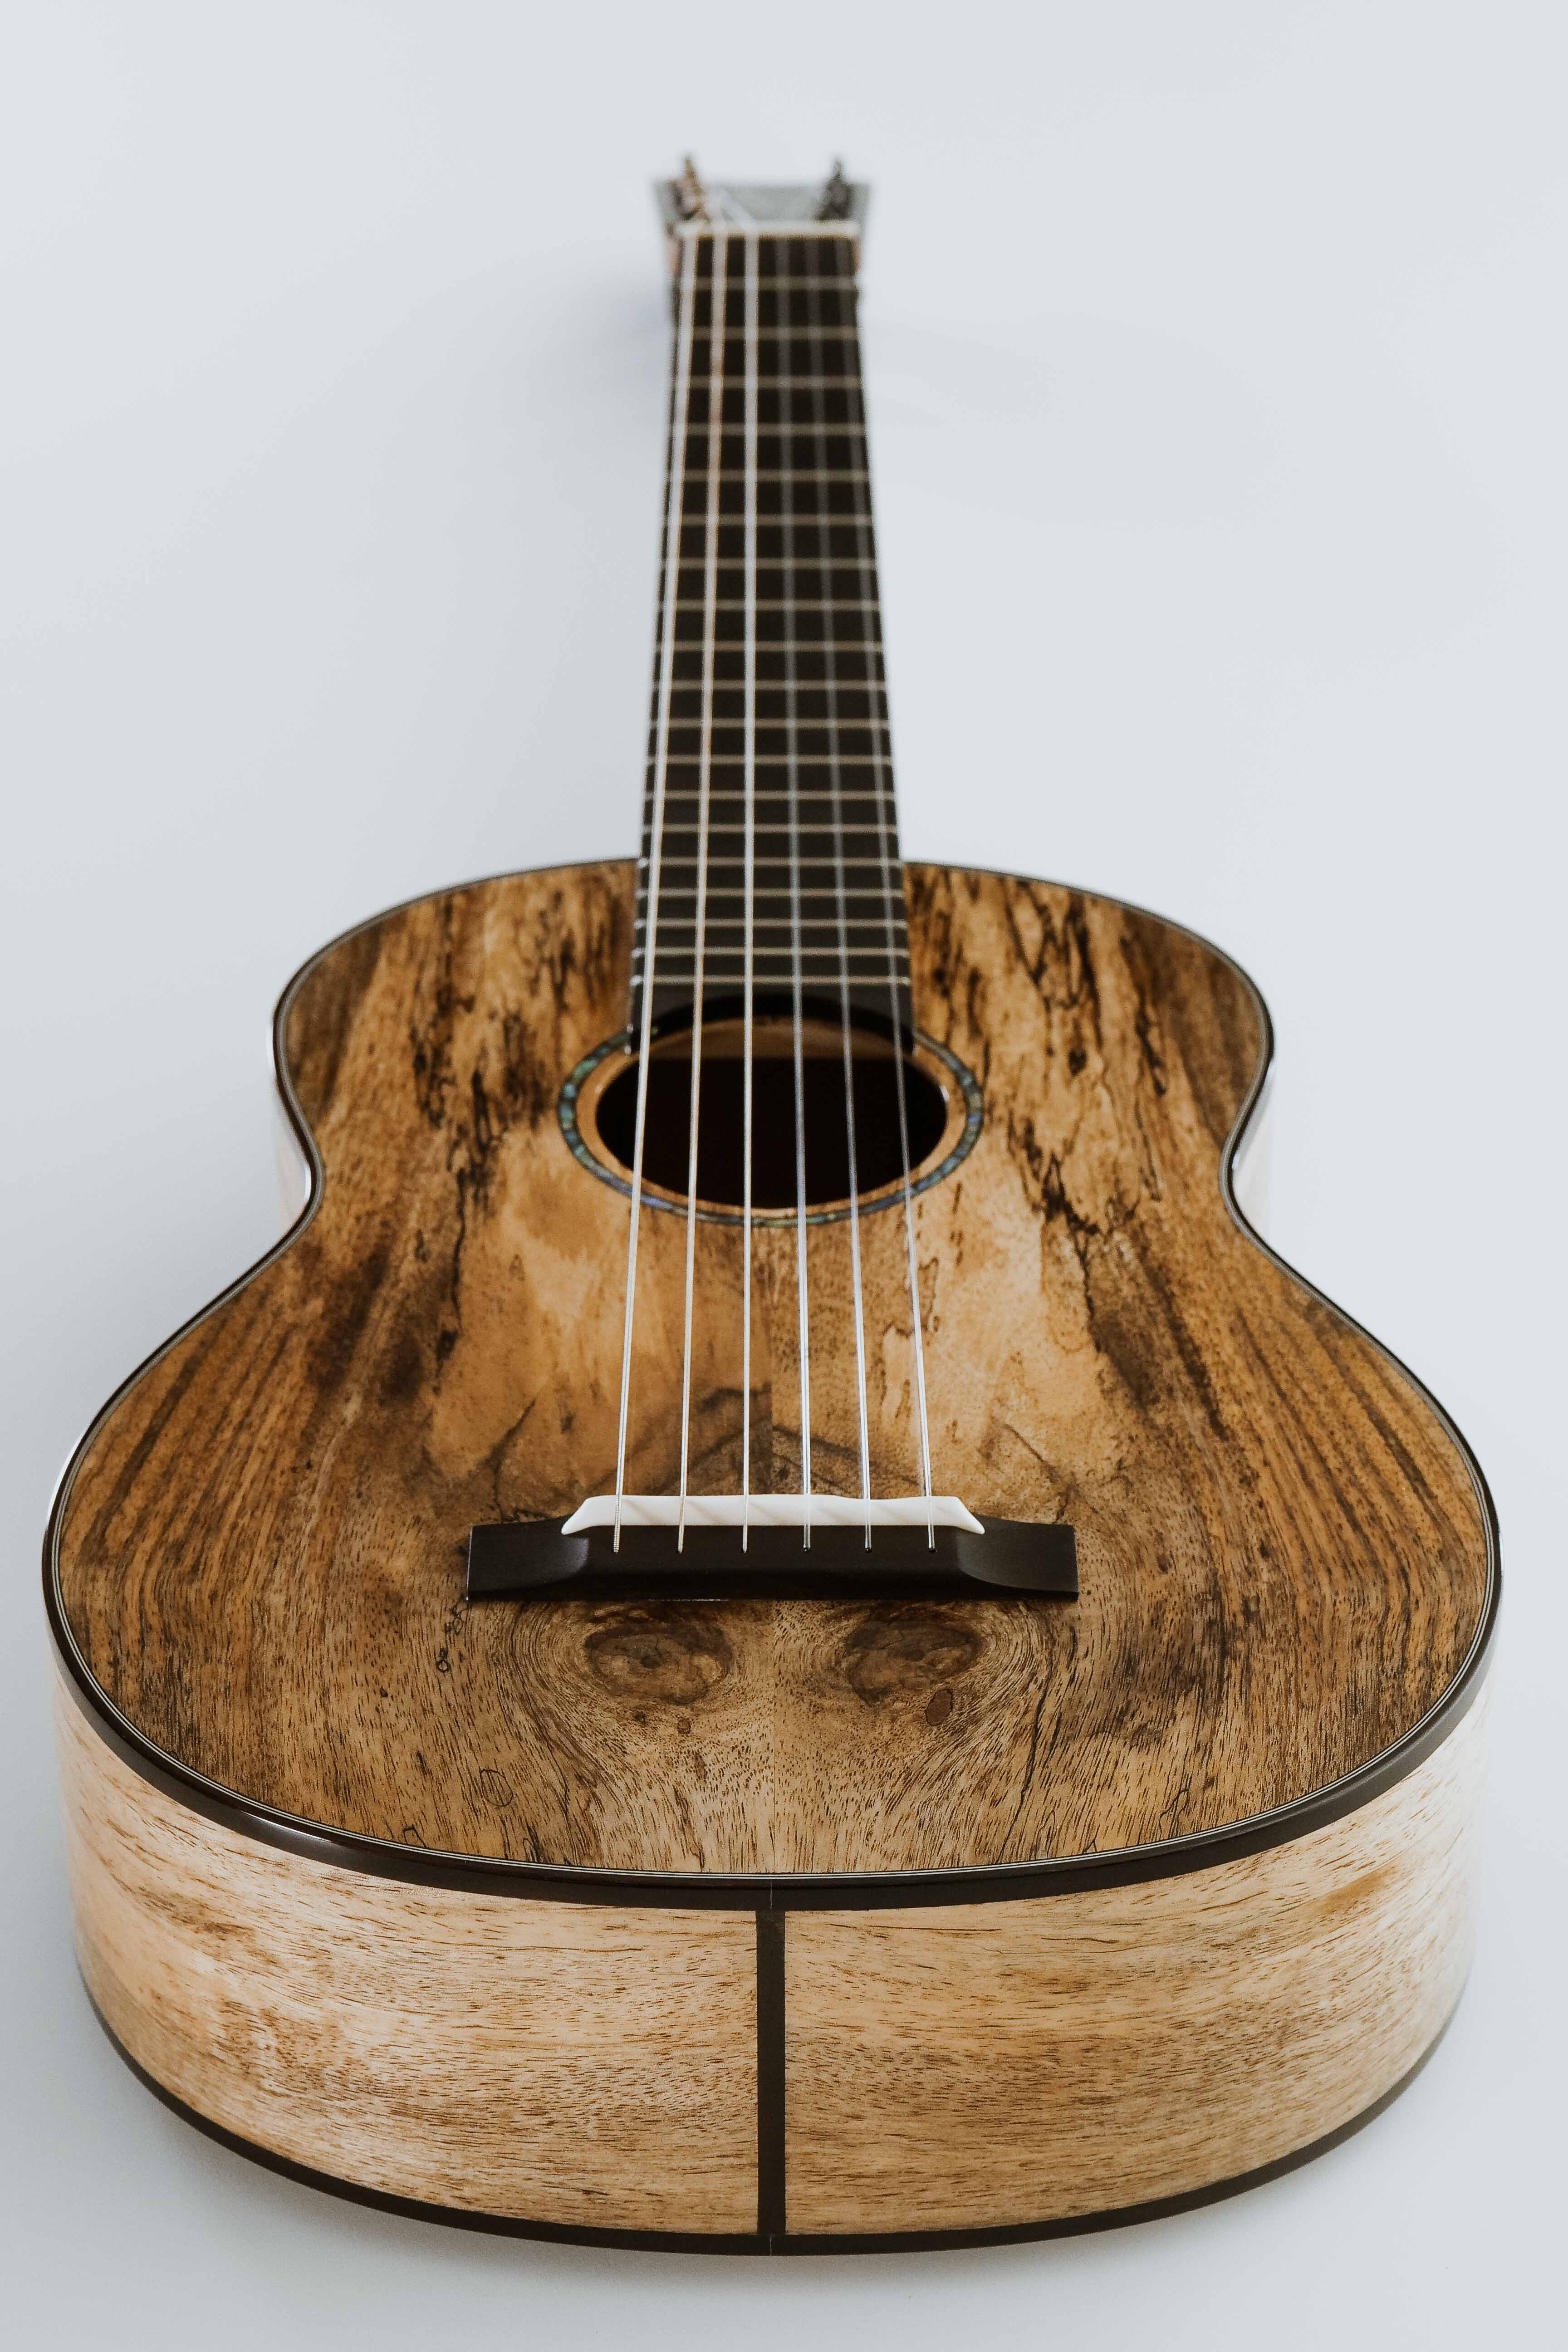 Romero Creations RC-P6-MG Parlor Guitar Spalted Mango "CELIA" LIMITED EDITION